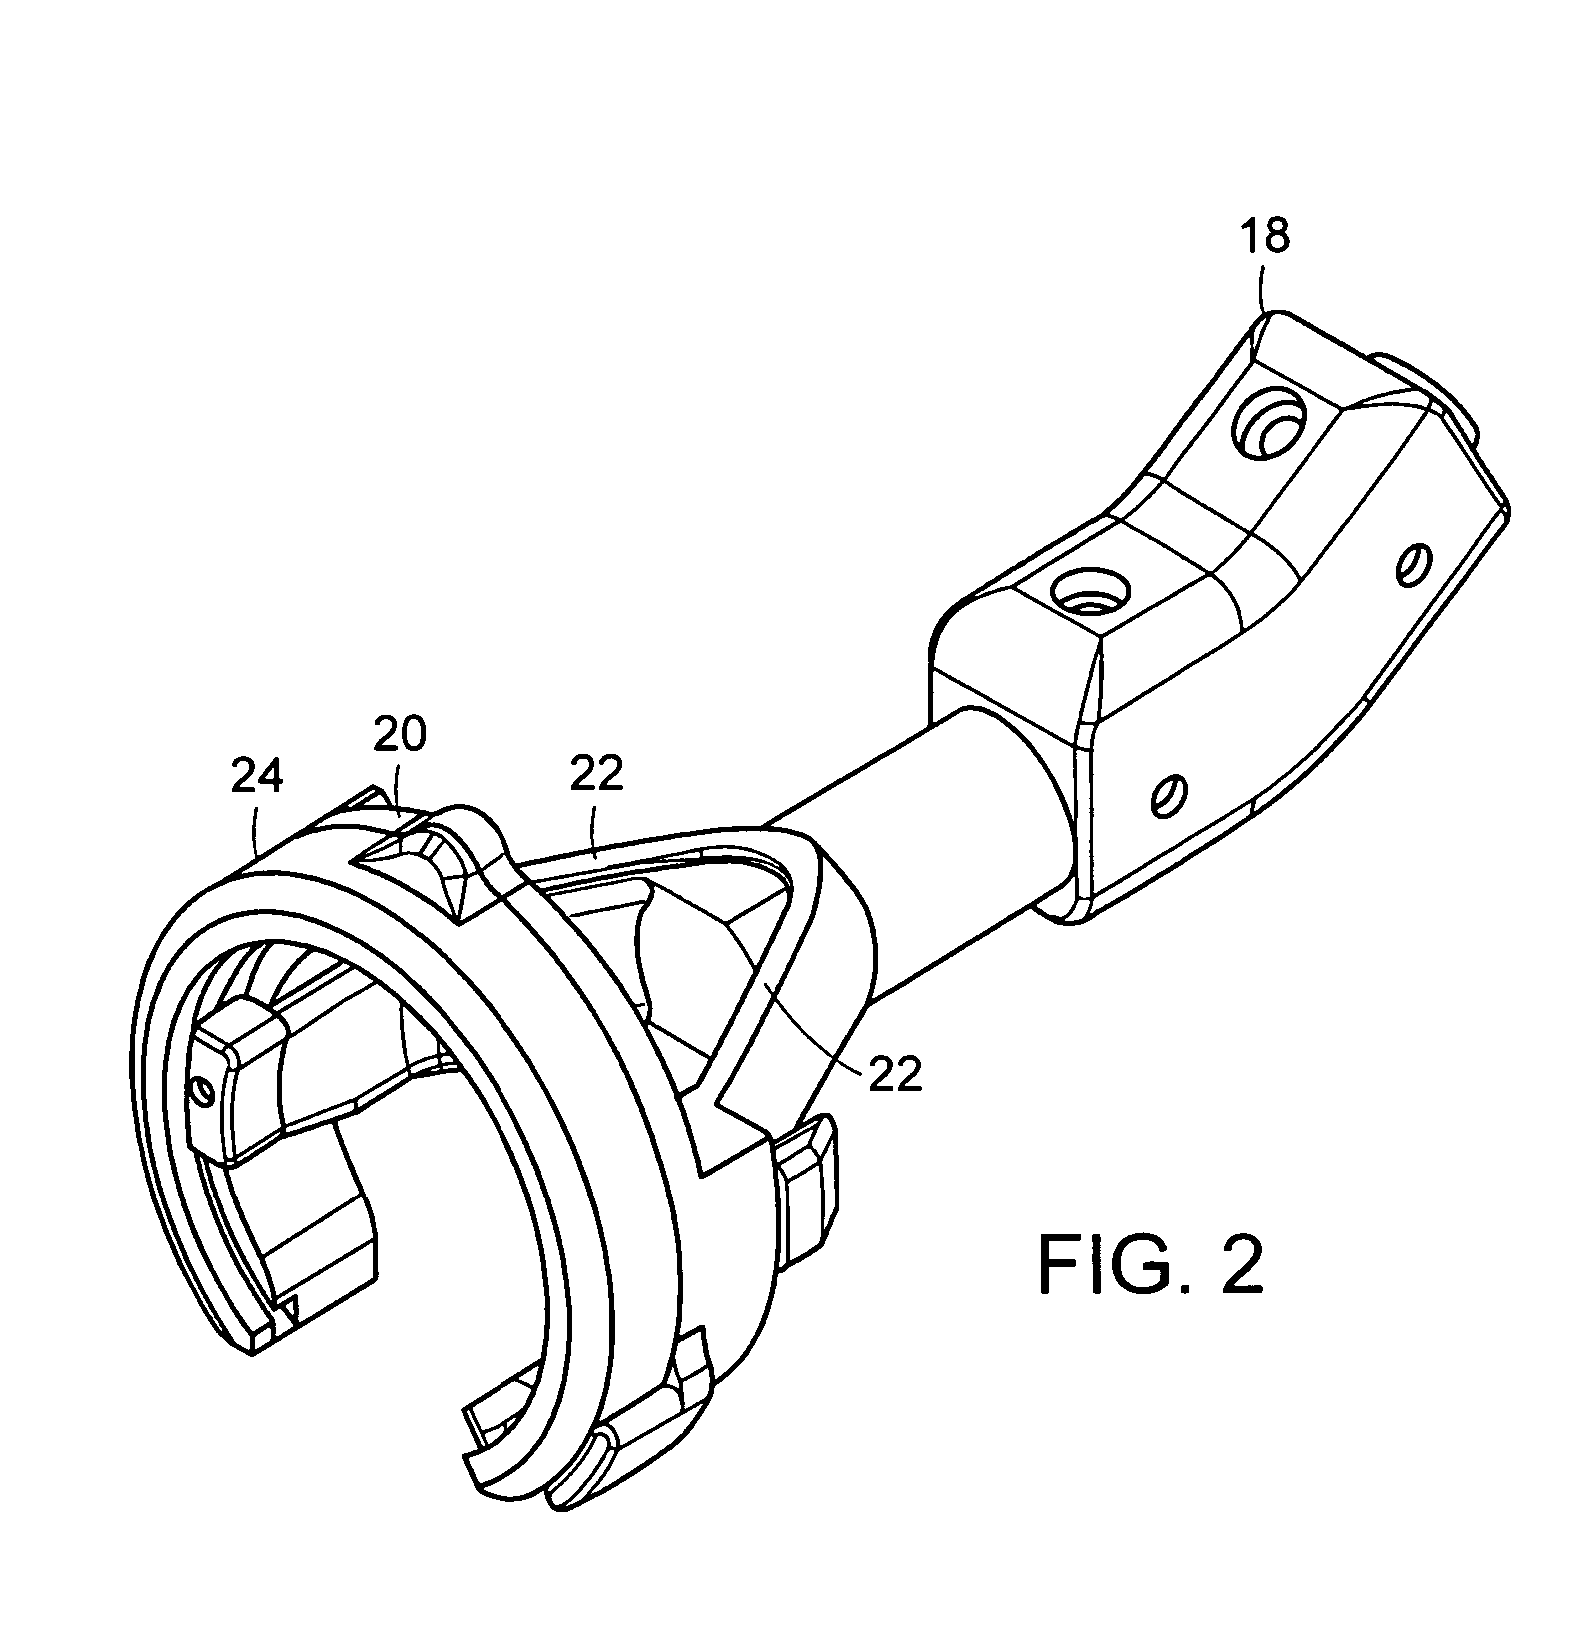 Apparatus for surgical suturing with thread management